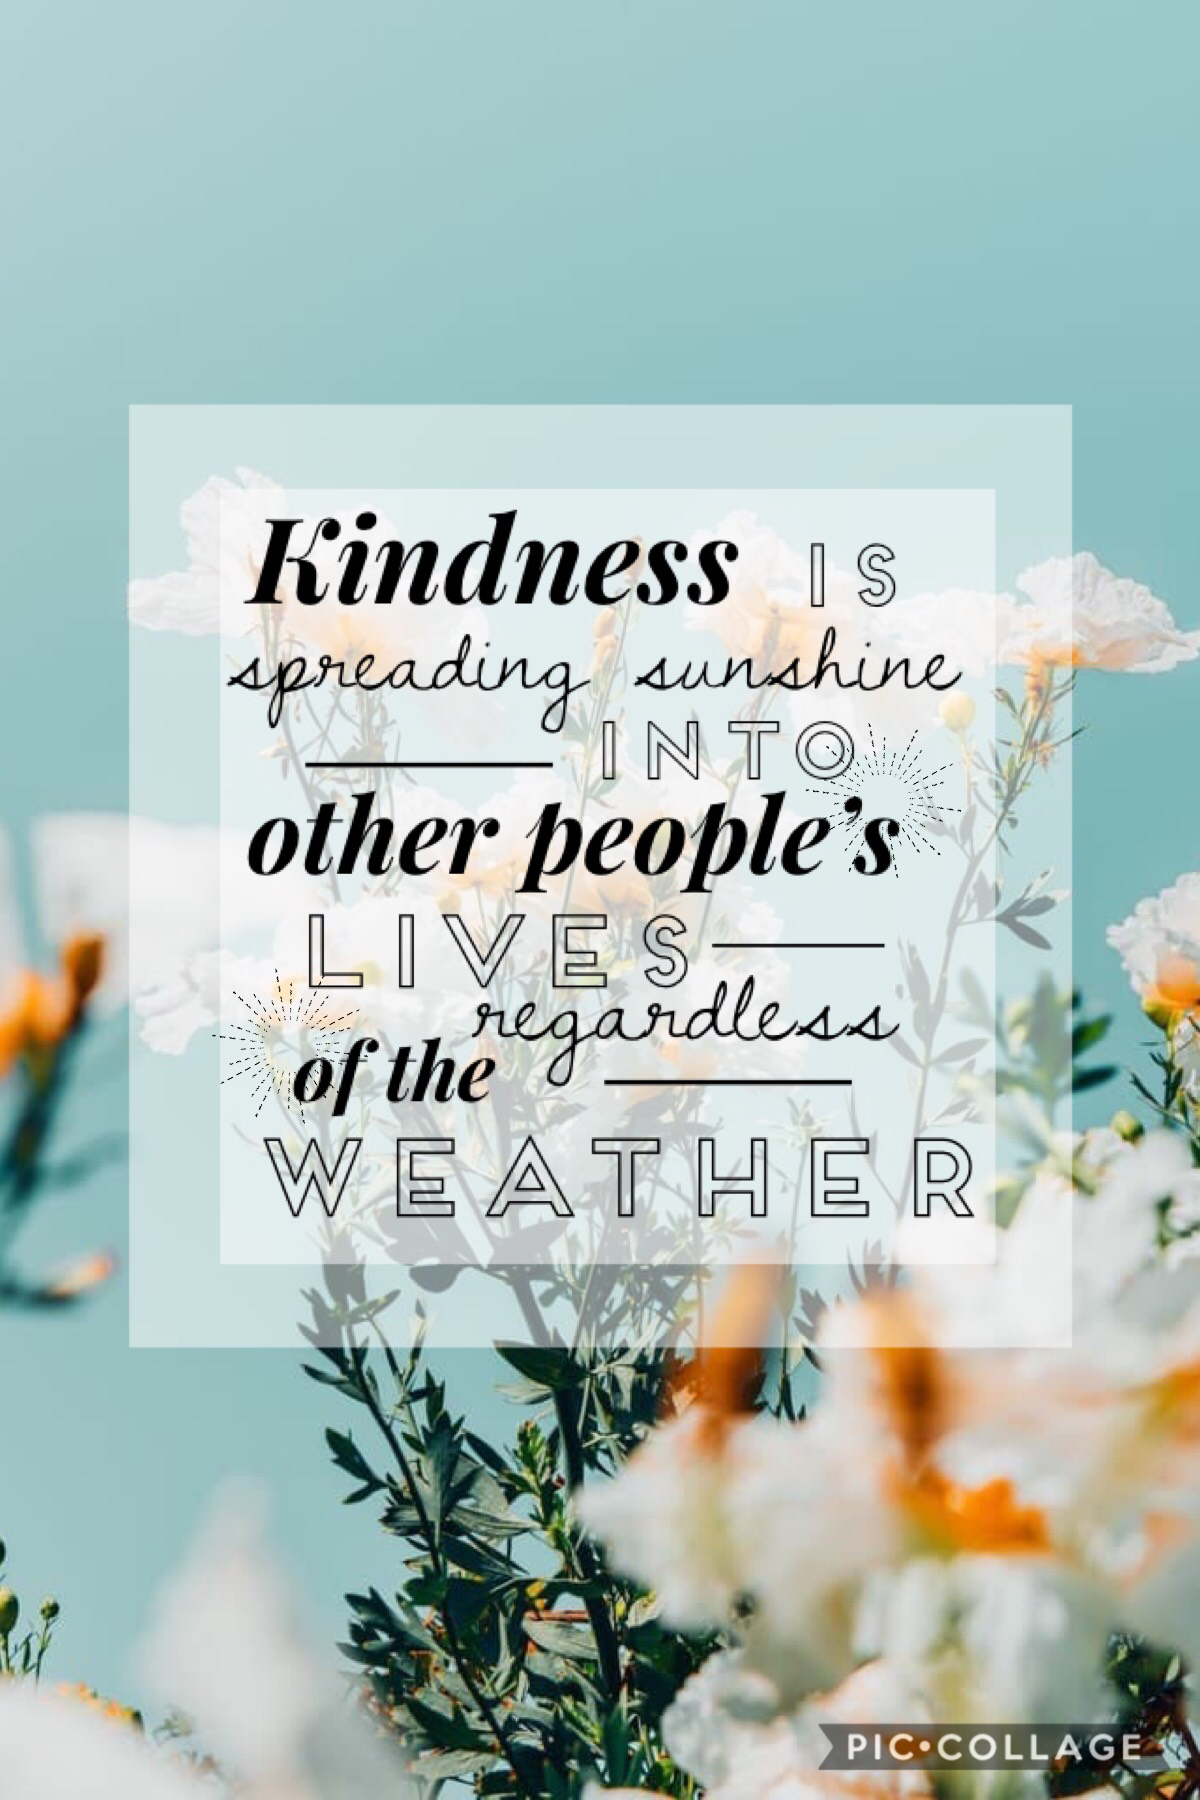 🌼Kindness🌼
Is spreading sunshine into other people’s lives regardless of the weather. 
☀️☀️☀️